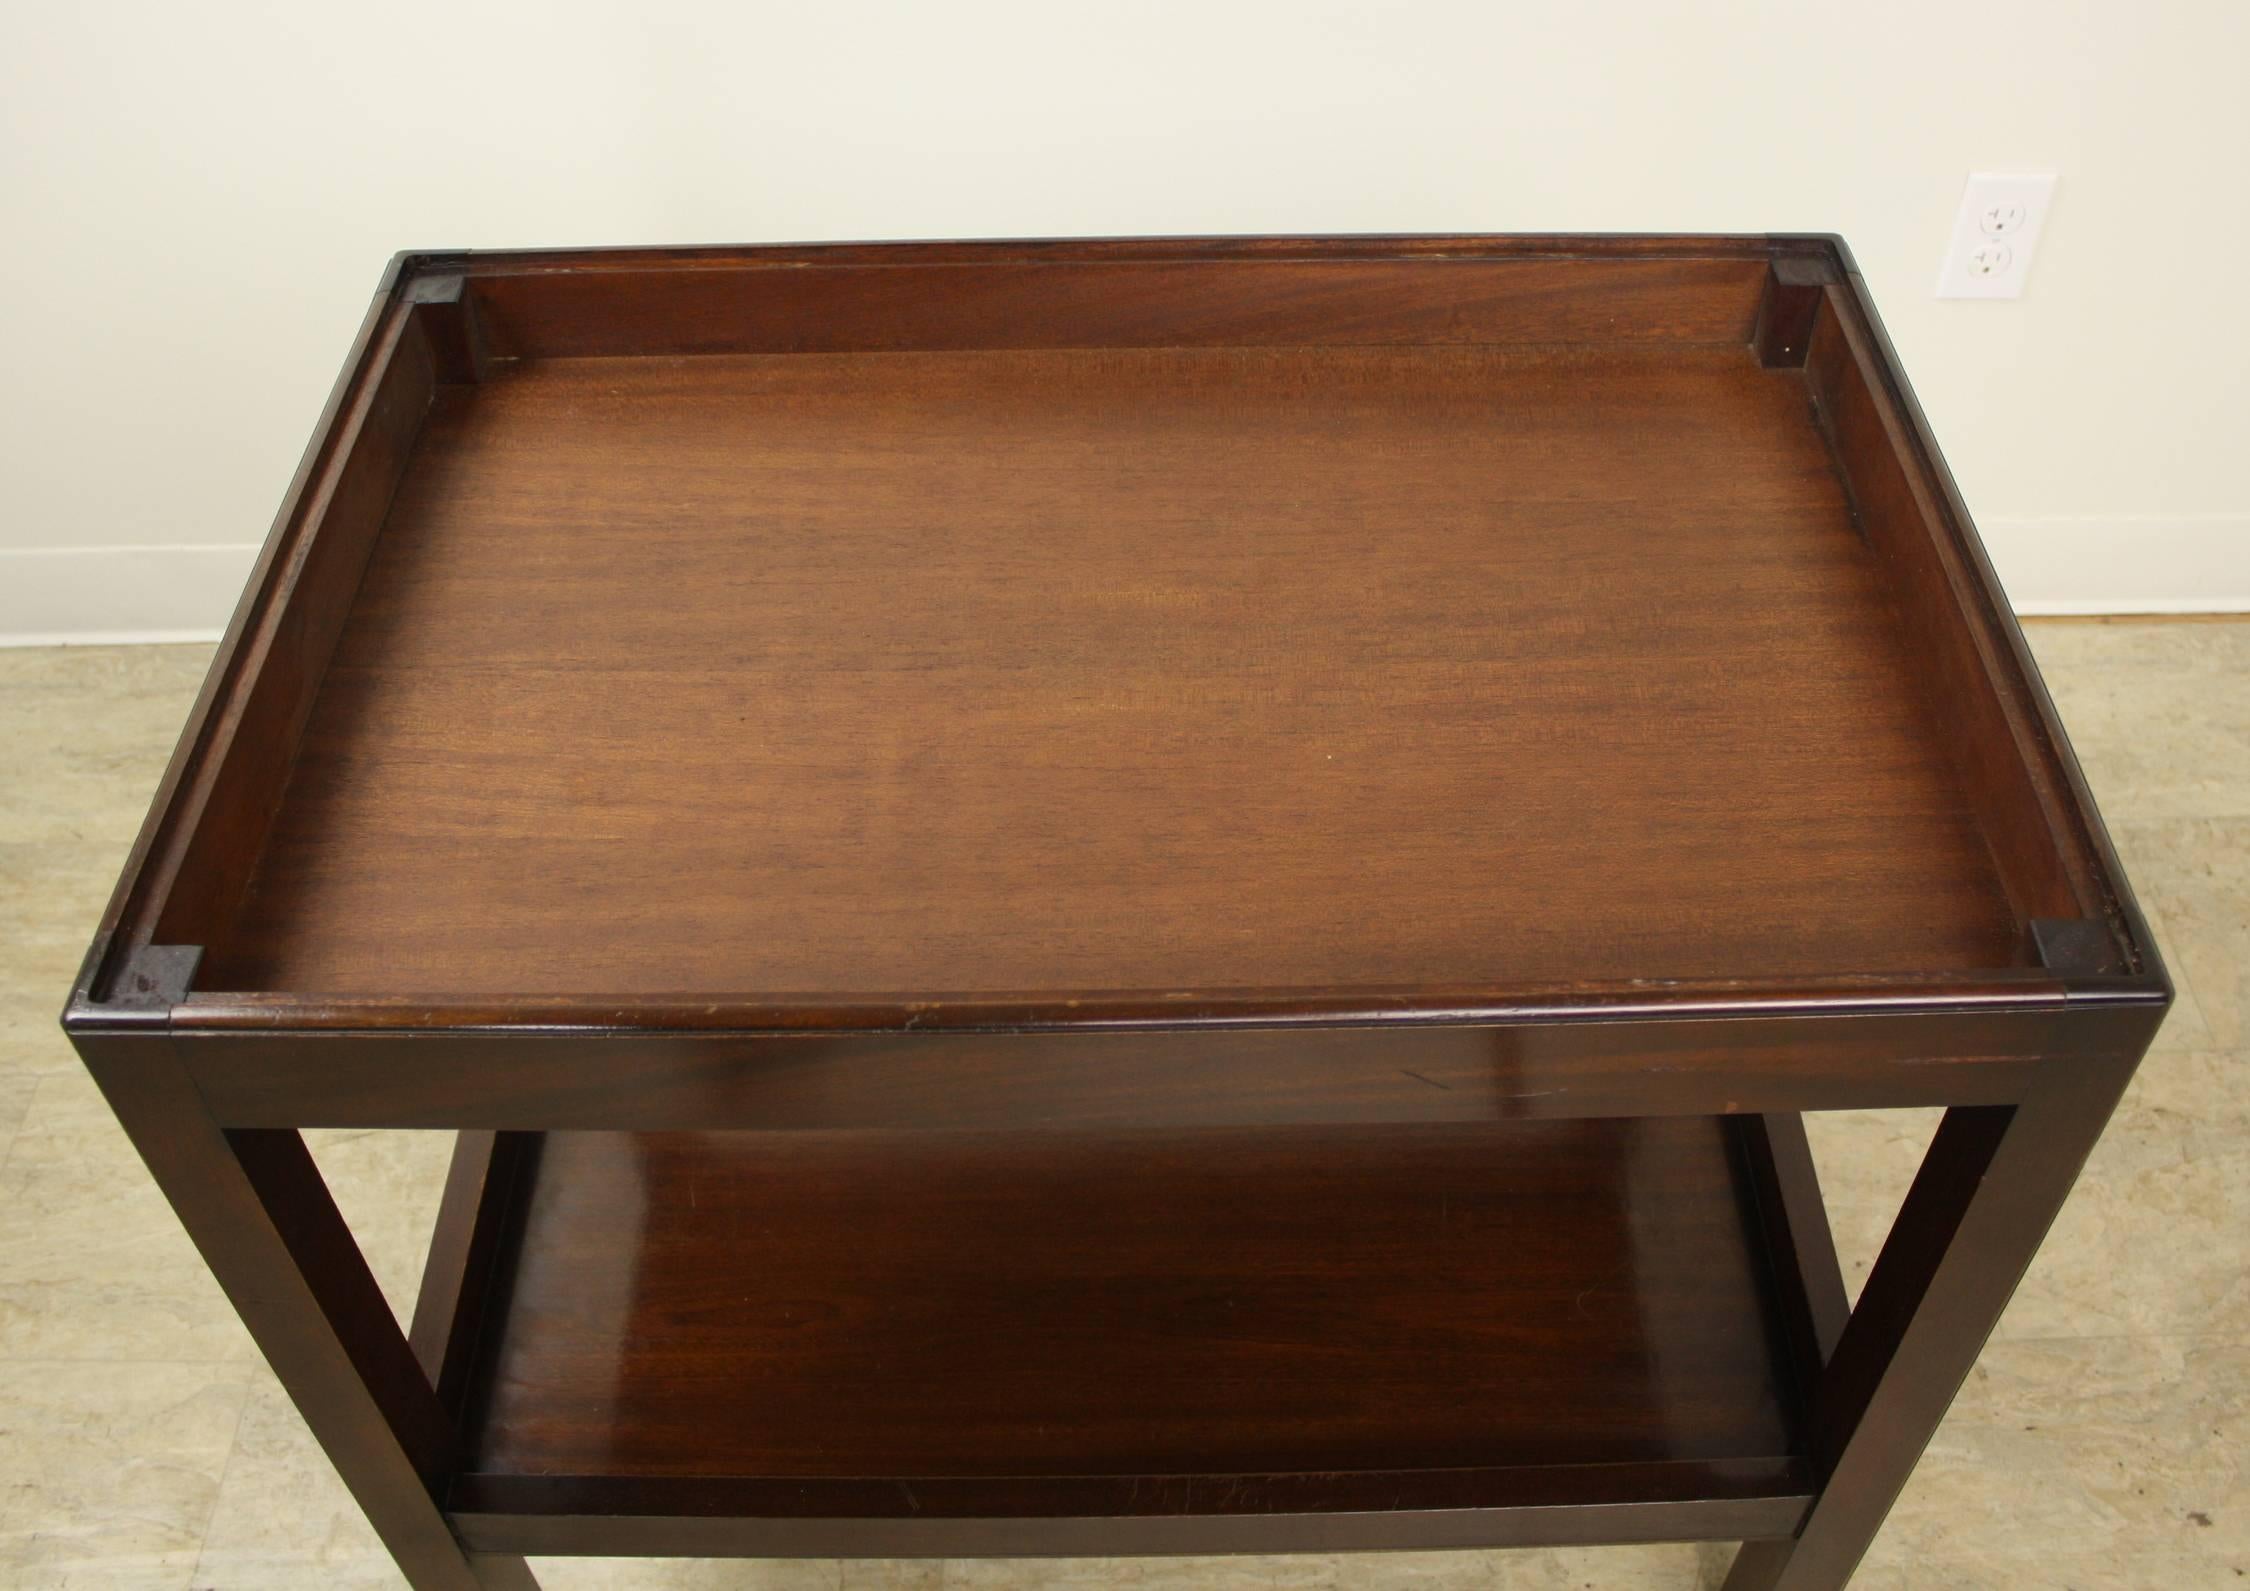 20th Century Antique Mahogany Tray on Table, Brass Accents